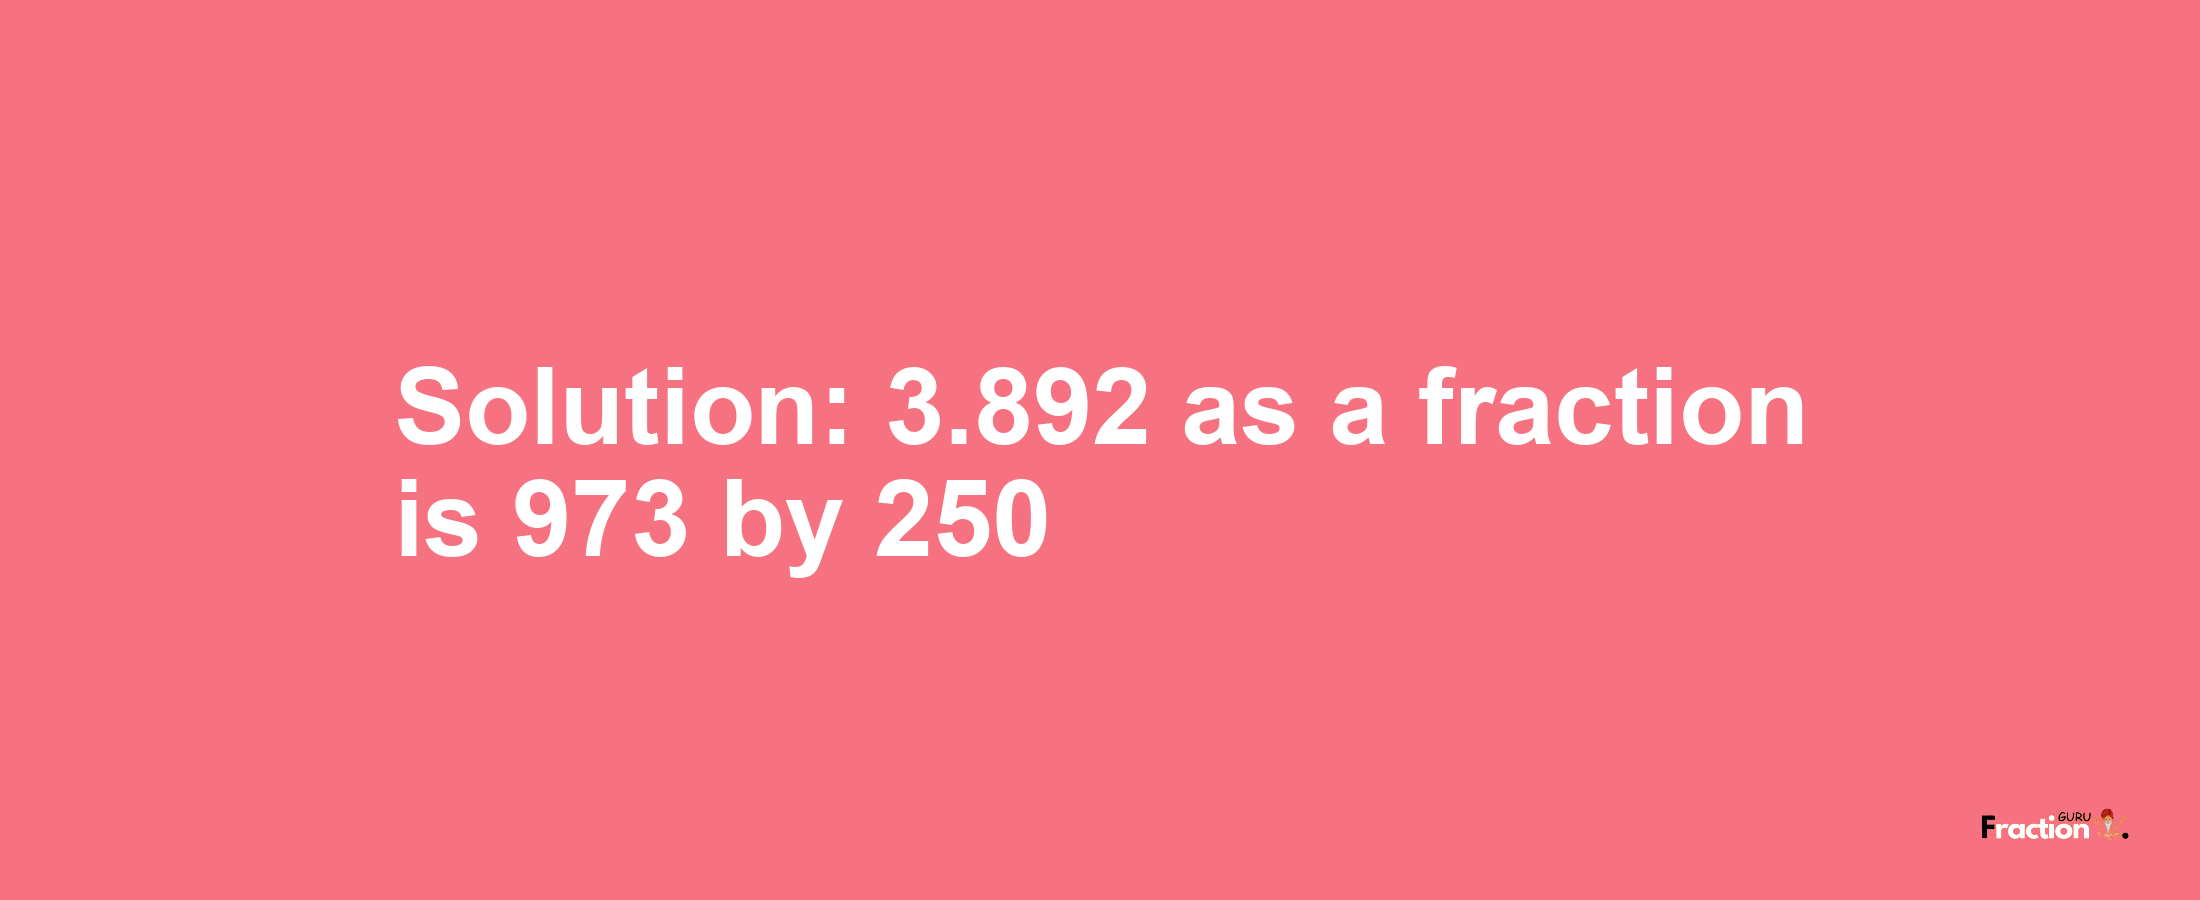 Solution:3.892 as a fraction is 973/250